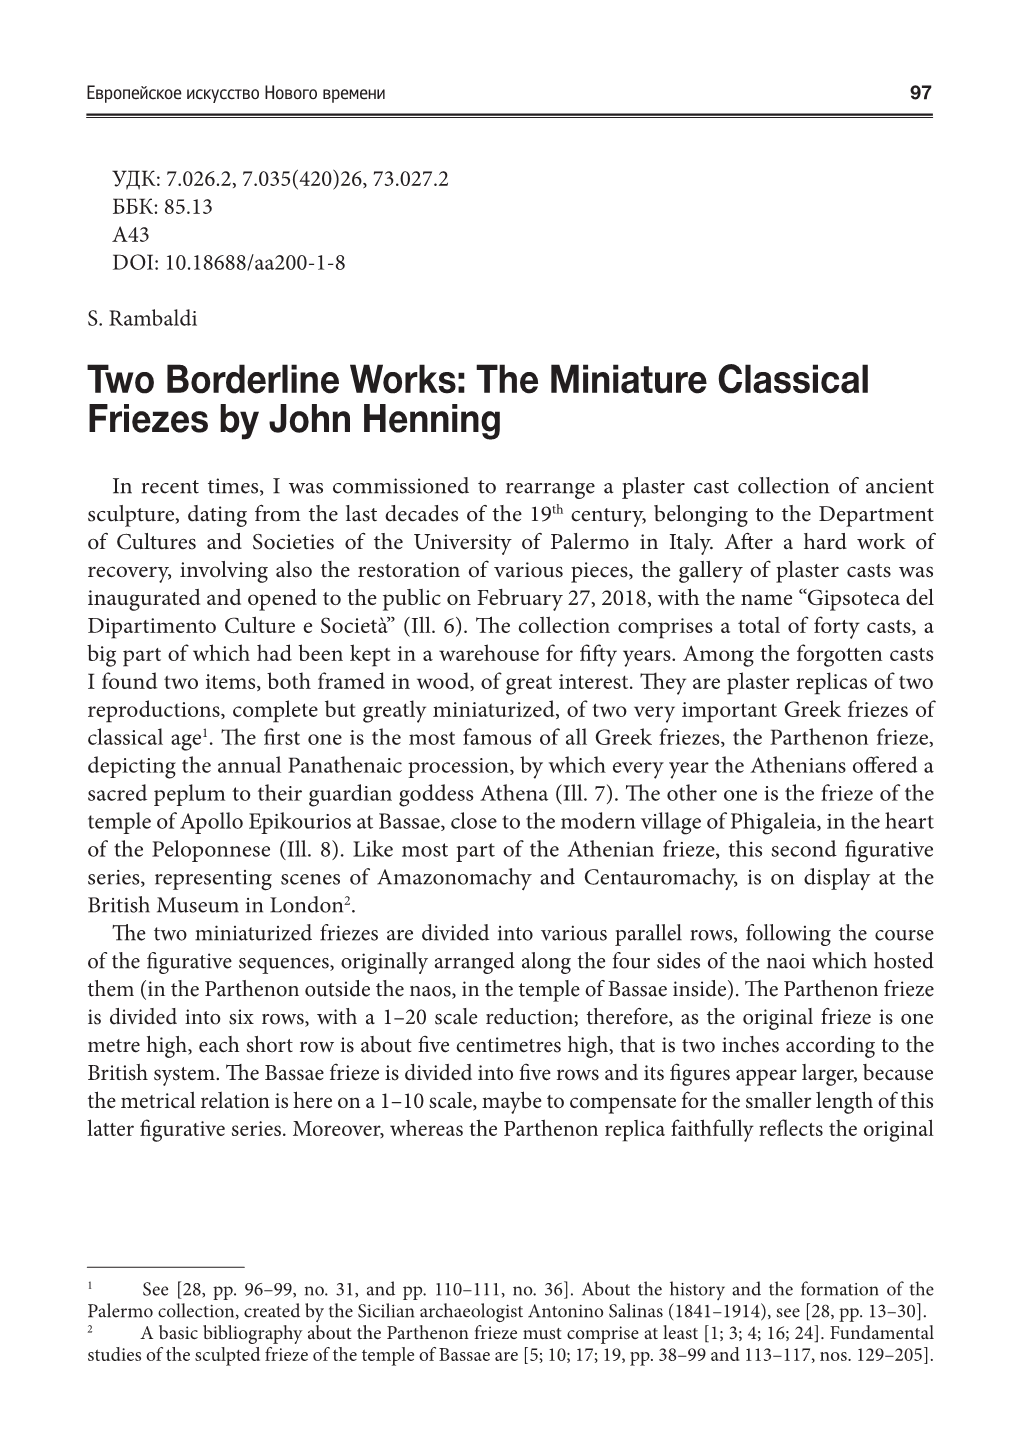 Two Borderline Works: the Miniature Classical Friezes by John Henning